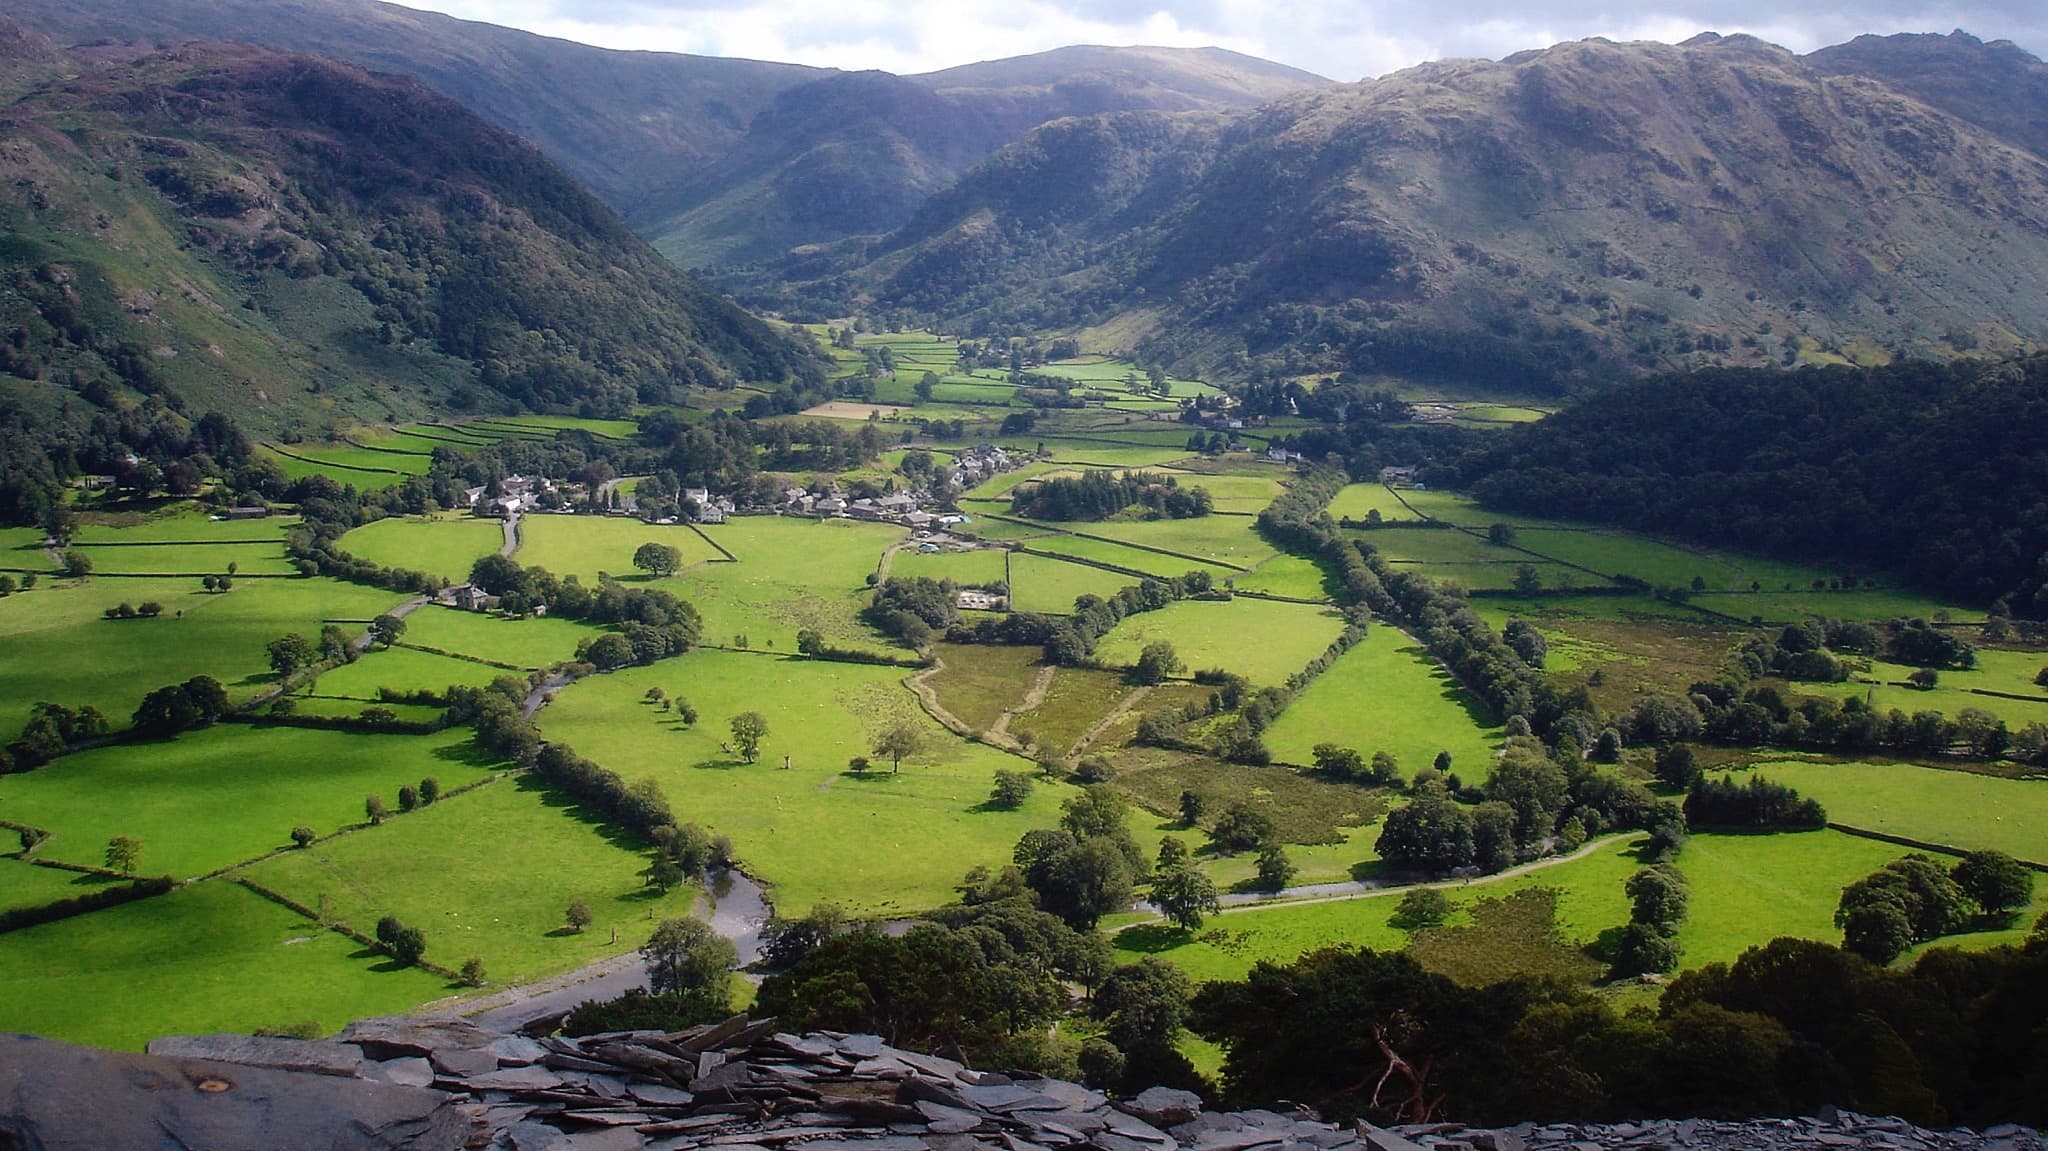 Borrowdale valley from the summit of Castle Crag. Photo by Claire Rowland, licensed CC-by-2.0.